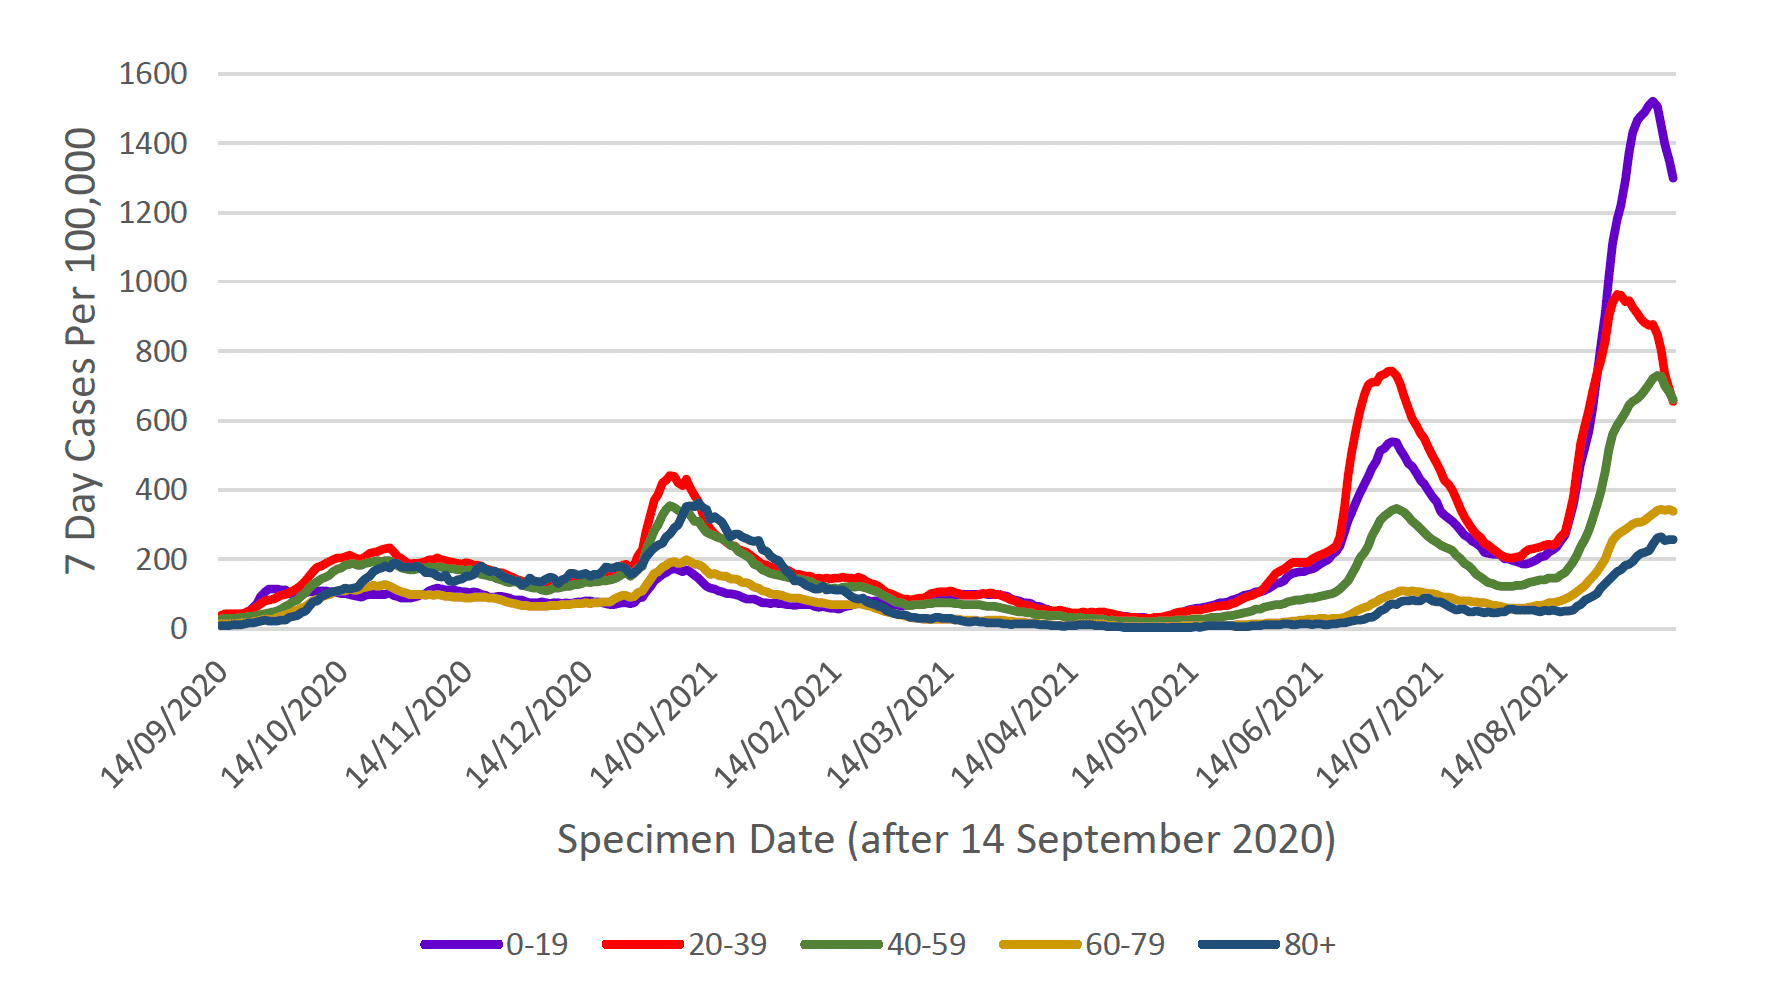 This line graph shows weekly cases per 100,000 people for five different age bands over time, from mid-September 2020. Each age band shows a similar trend with a peak in cases in January, with the 20 to 39 age band having the highest case rate, and the under 20 age band having the lowest case rate. Case rates reduced in all age groups from this peak and then started to increase again sharply from mid-May, reaching a peak at the beginning of July 2021. 7 day case rates per 100,000 population then started to decrease sharply followed by a sharp increase in cases in mid-August 2021. Case rates started to go down at the start of September for most age groups except for the 60-79 and 80+ groups.